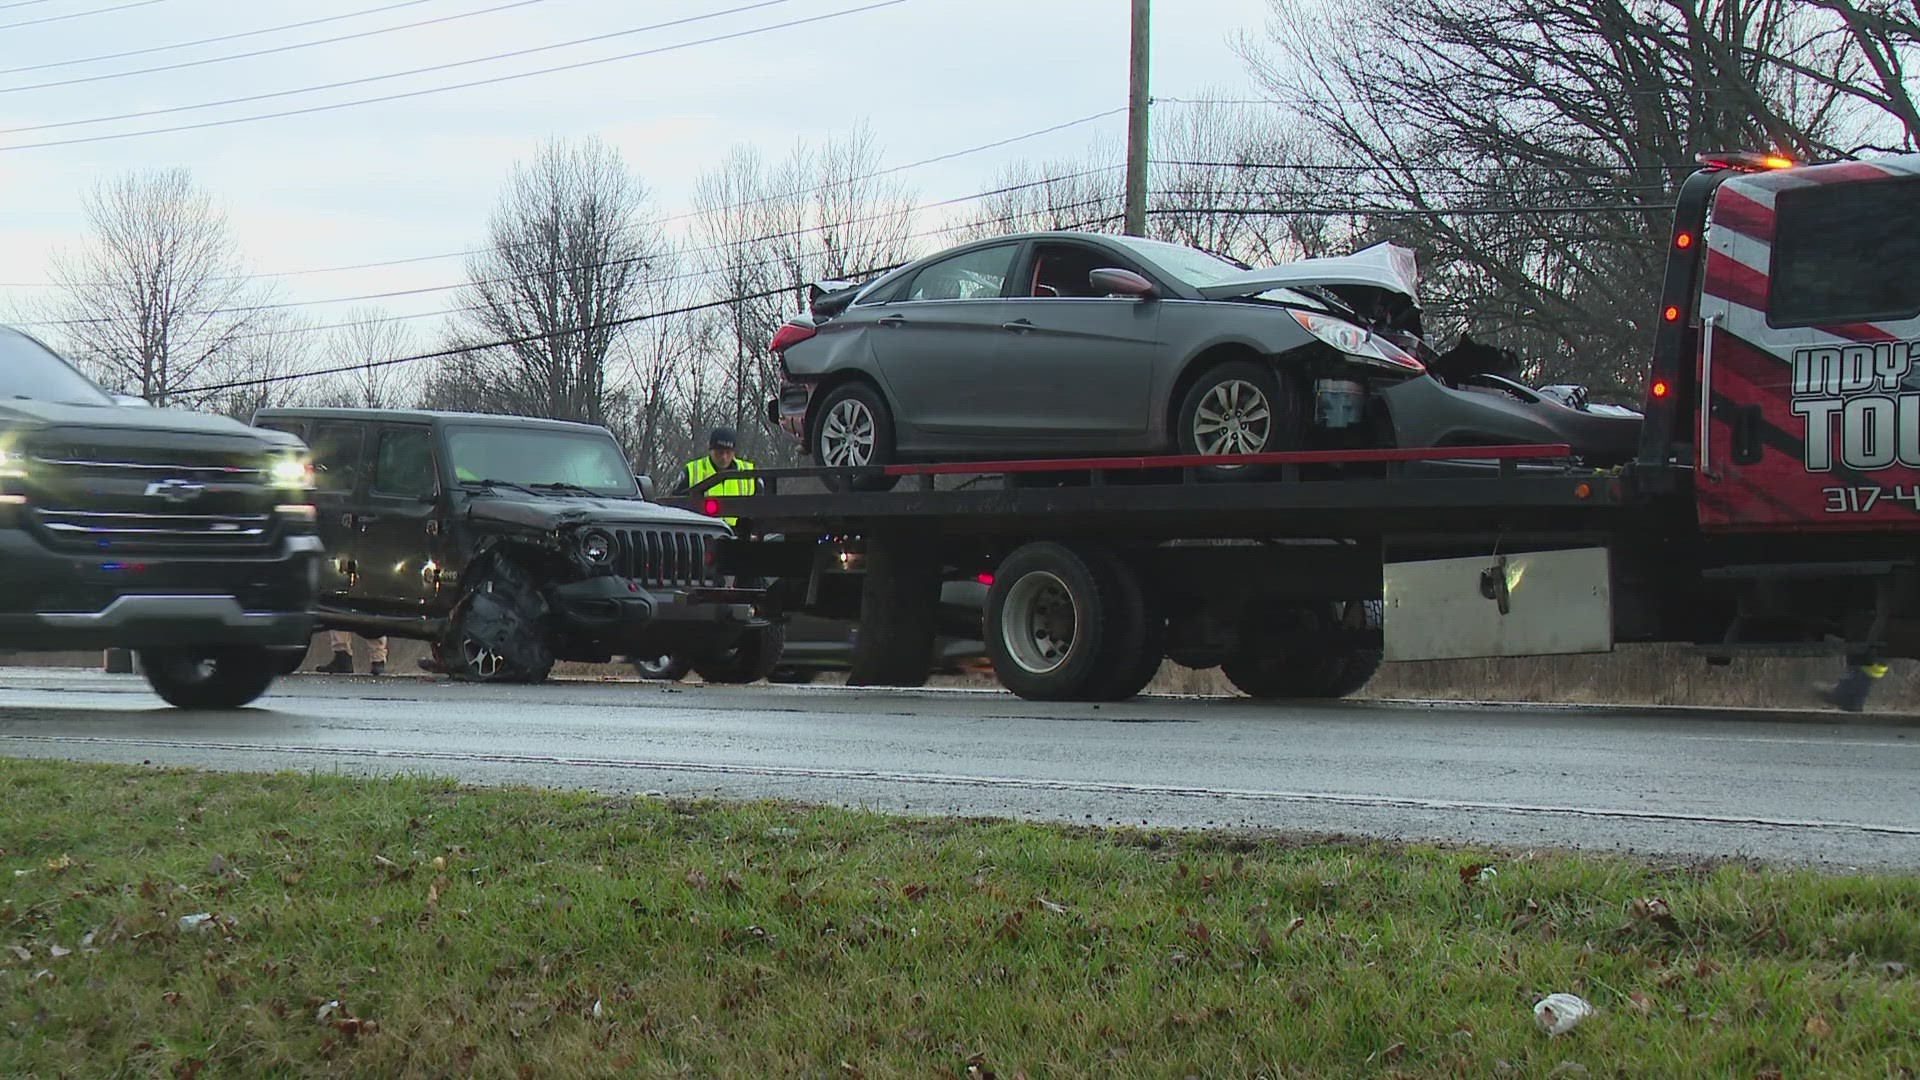 ​The multi-car crash happened shortly before 7 a.m. near the intersection of West 56th Street and Lafayette Road.